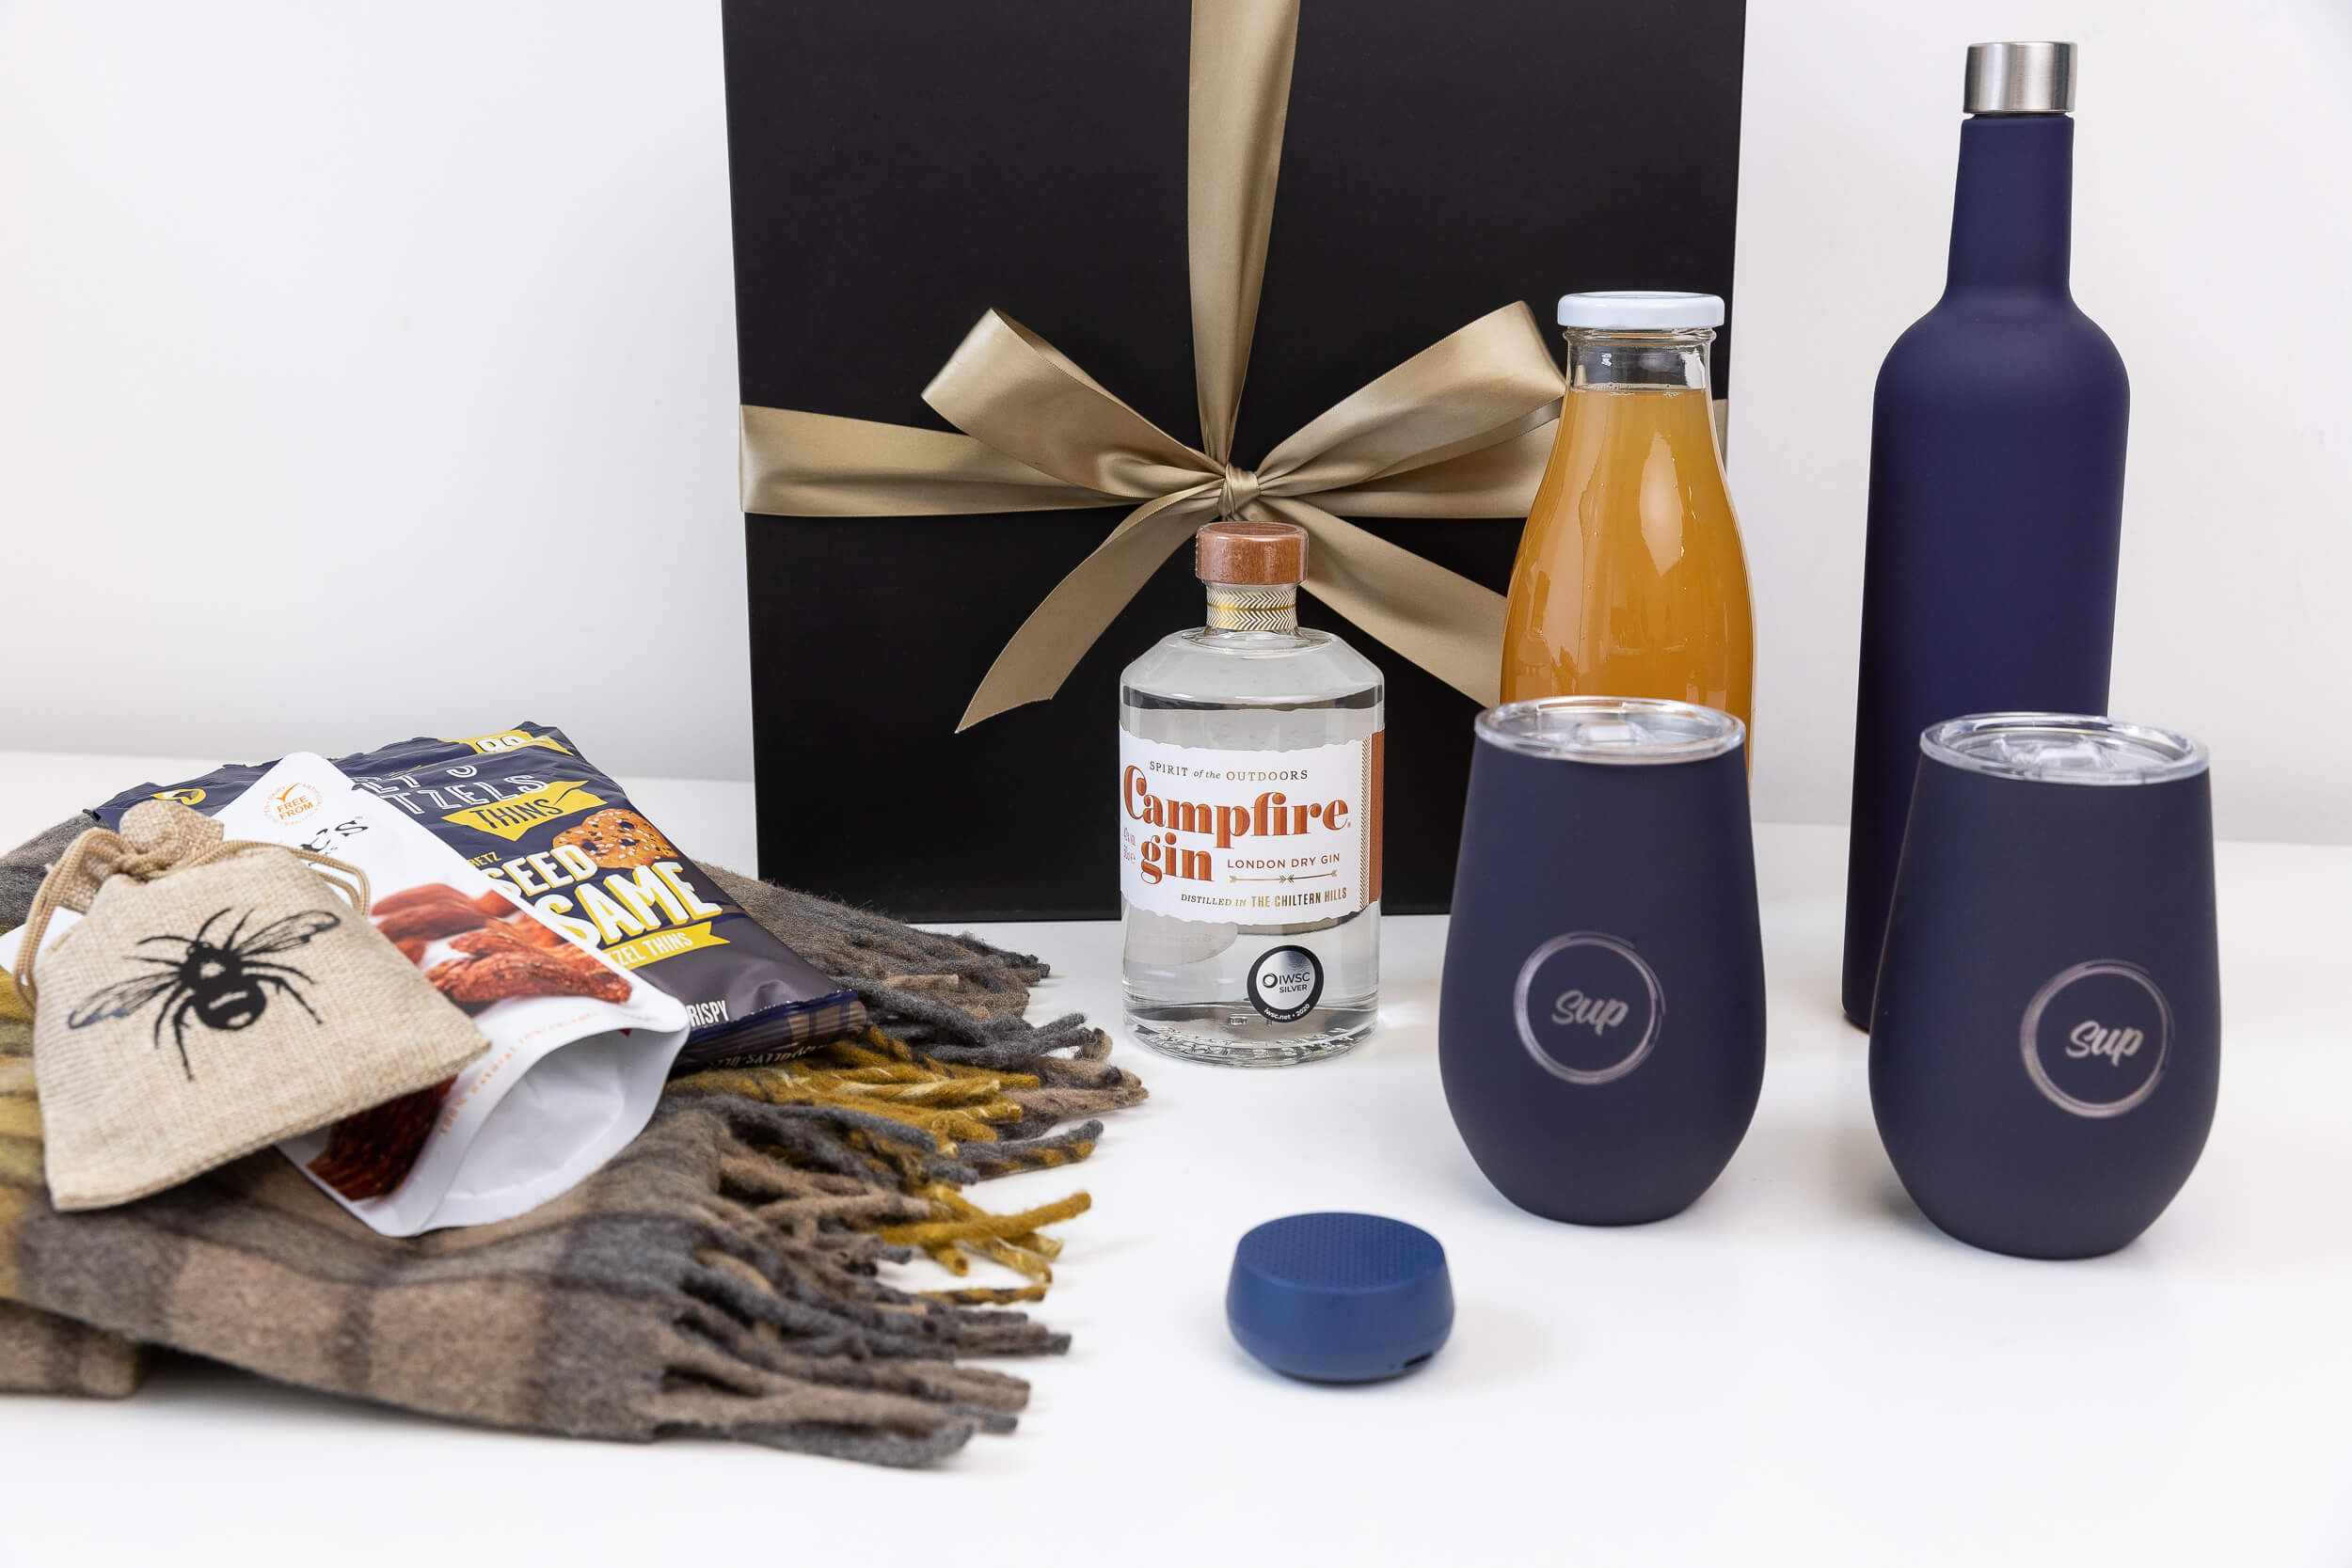 Christmas Employee Gifts with Sup drinkware, tartan wool blanket and Campfire gin